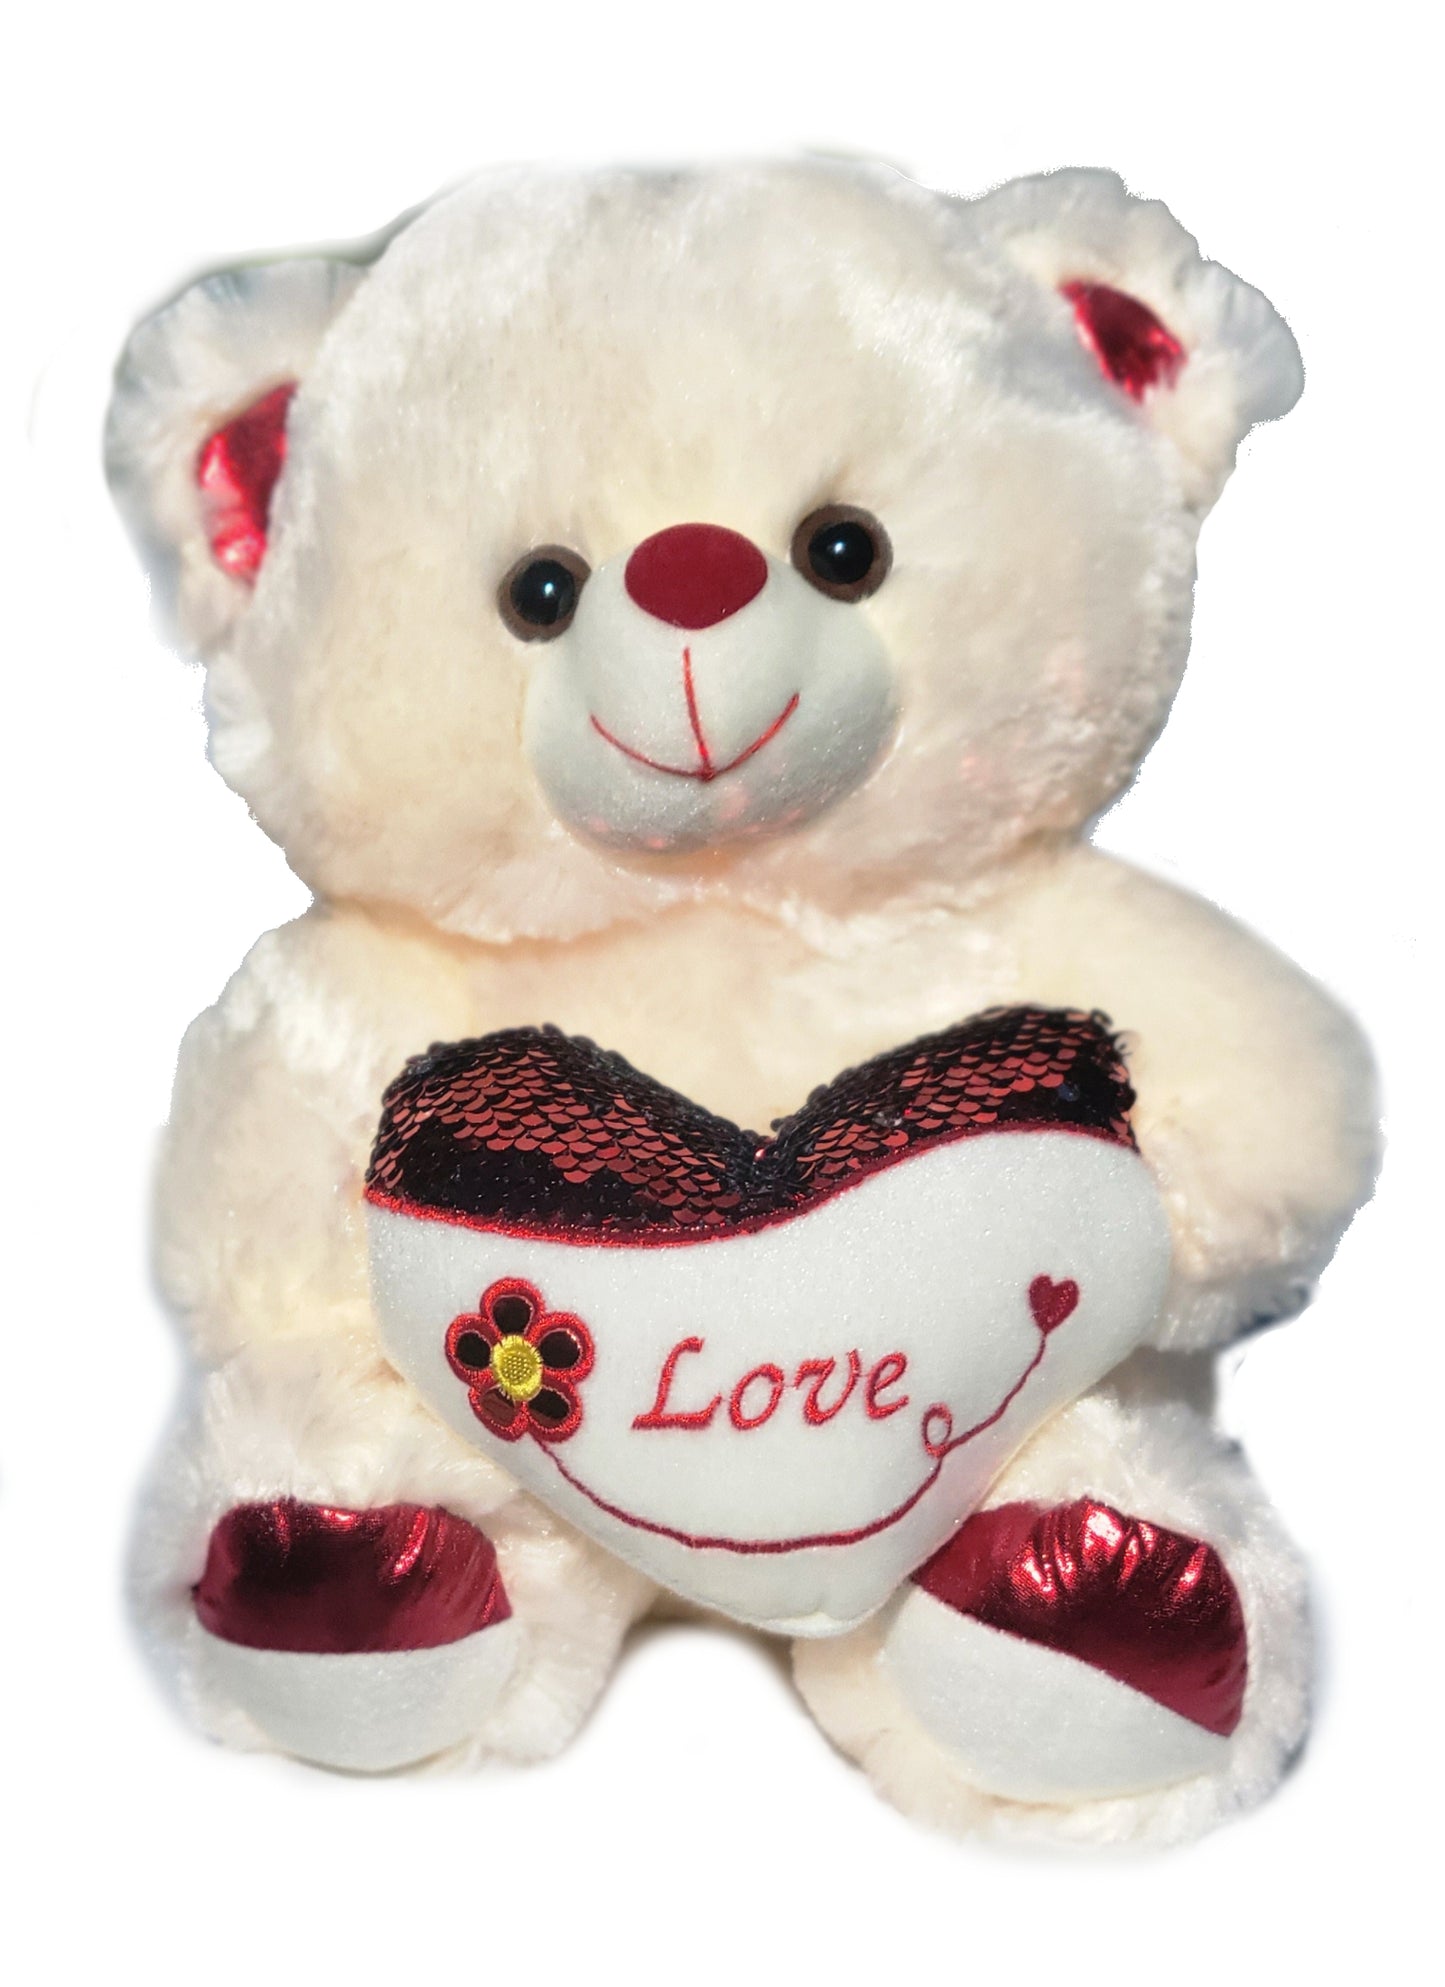 Bear Holding Love Sequin Heart and Flower Embroidery 11 Inches Valentine's Day Gift & Home Decor